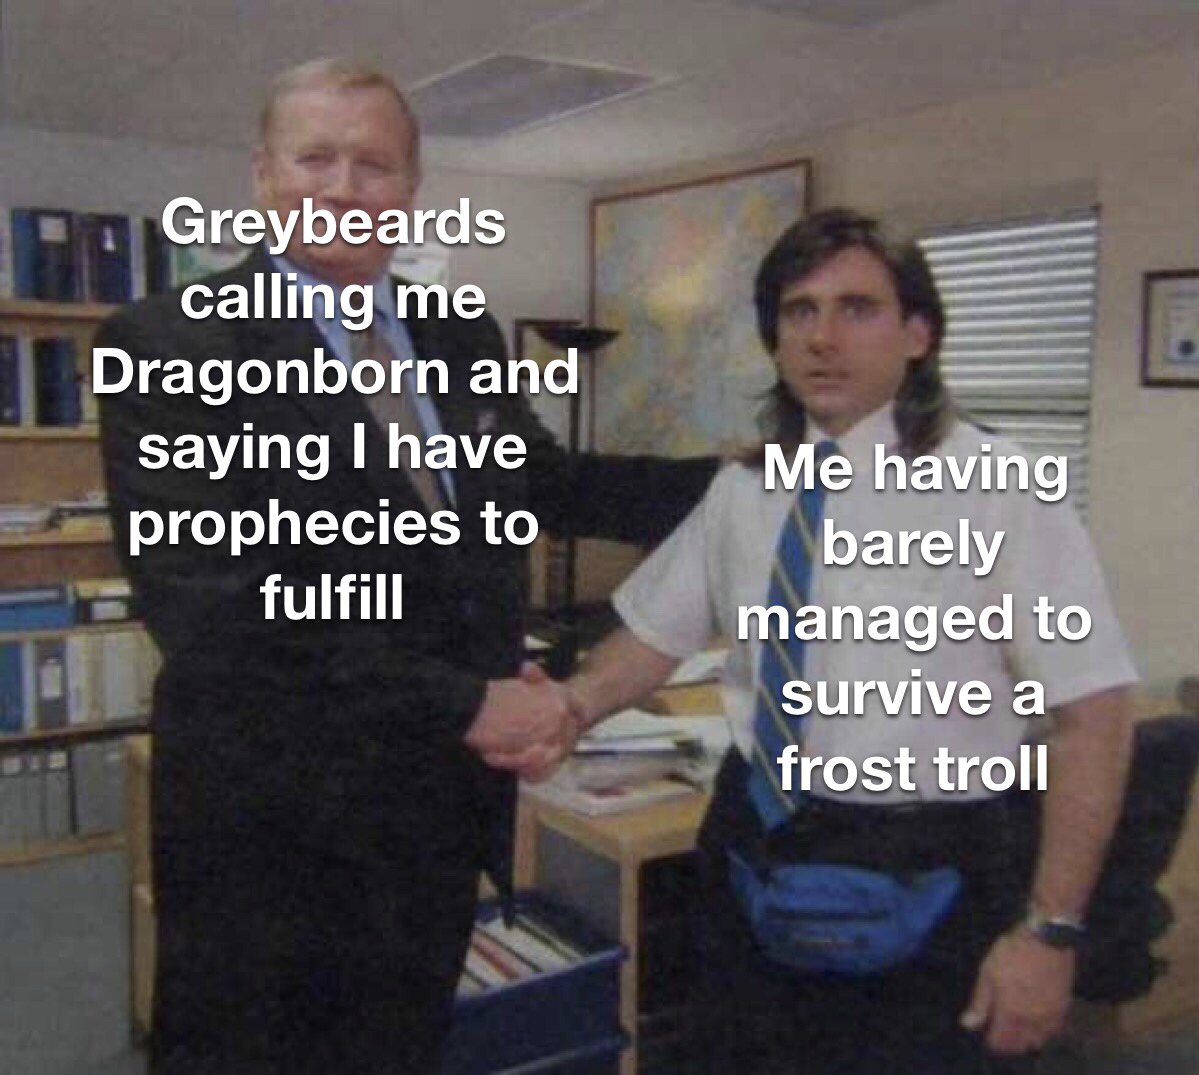 young michael scott shaking ed truck's hand - Greybeards calling me Dragonborn and saying I have prophecies to fulfill Me having barely managed to survive a frost troll